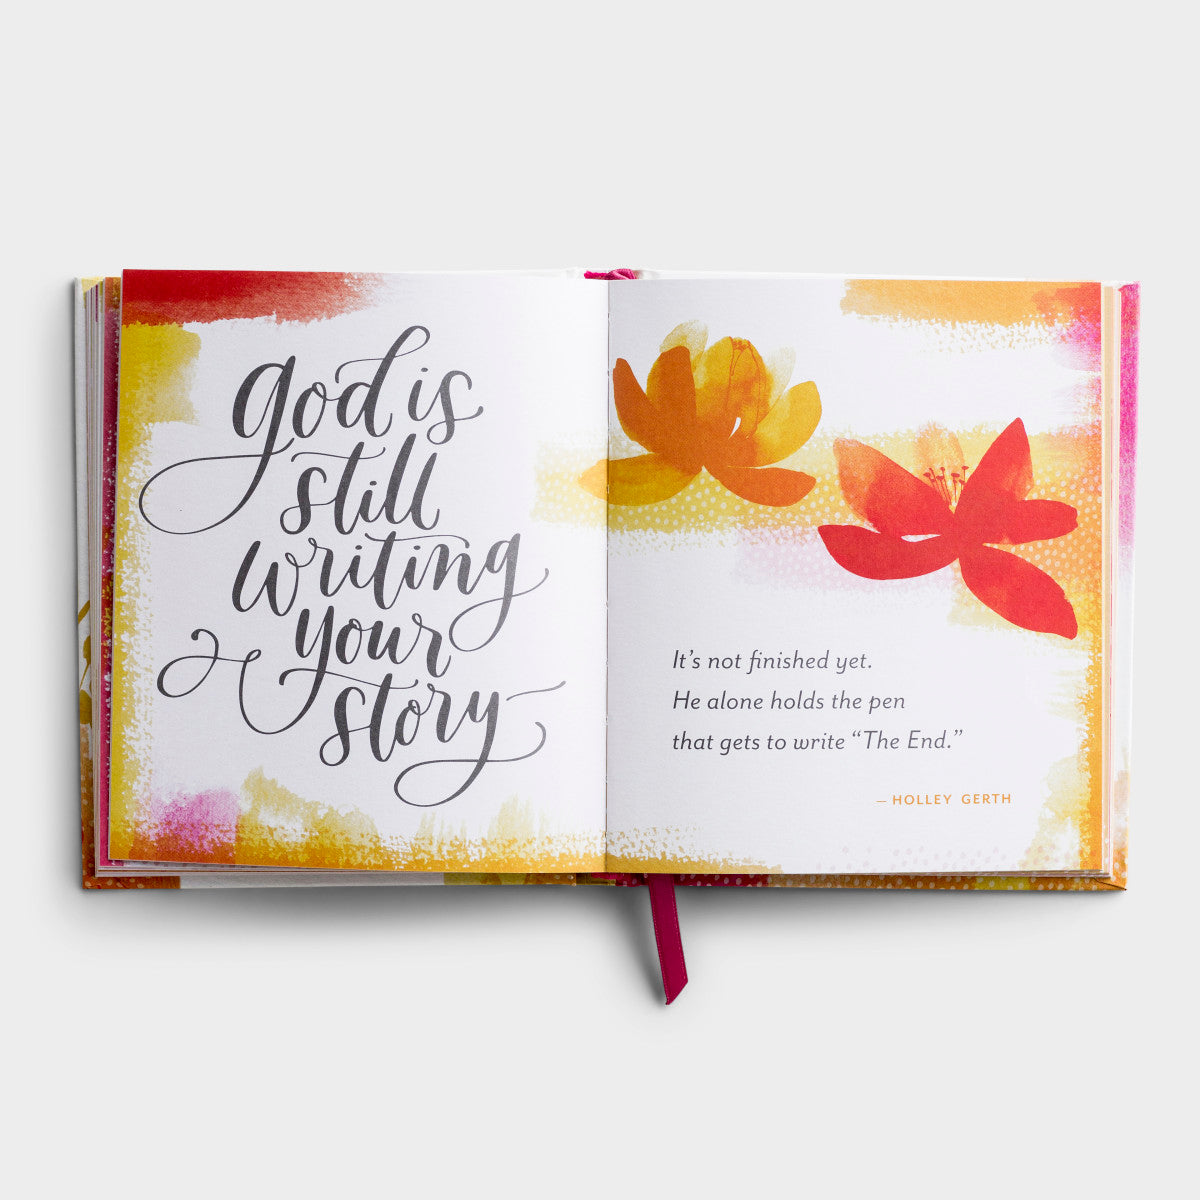 Promises from God for Life's Hard Moments - The Christian Gift Company